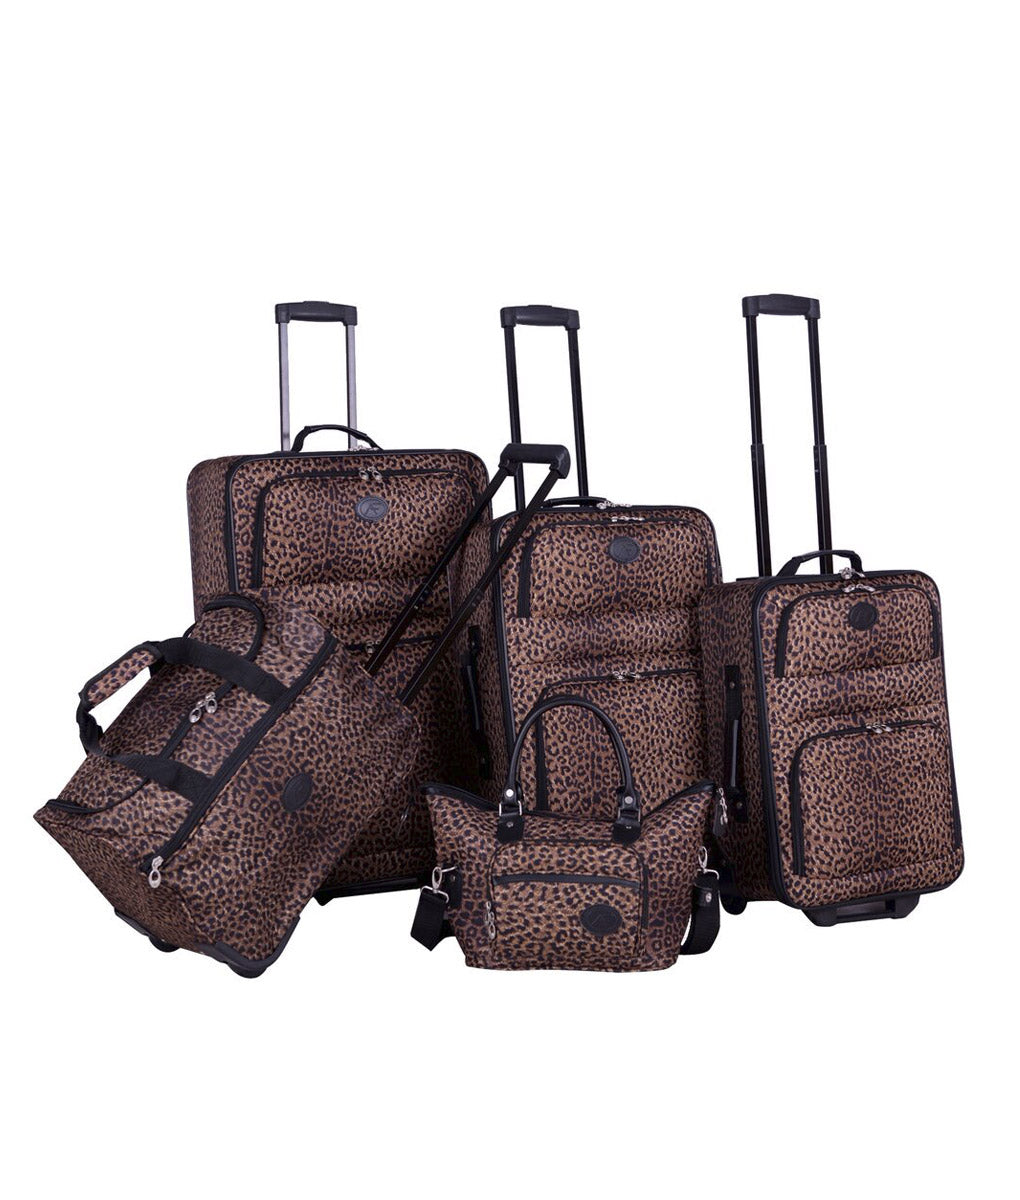 American Flyer Signature 4-Piece Luggage Set 83700-4 CGOL - The